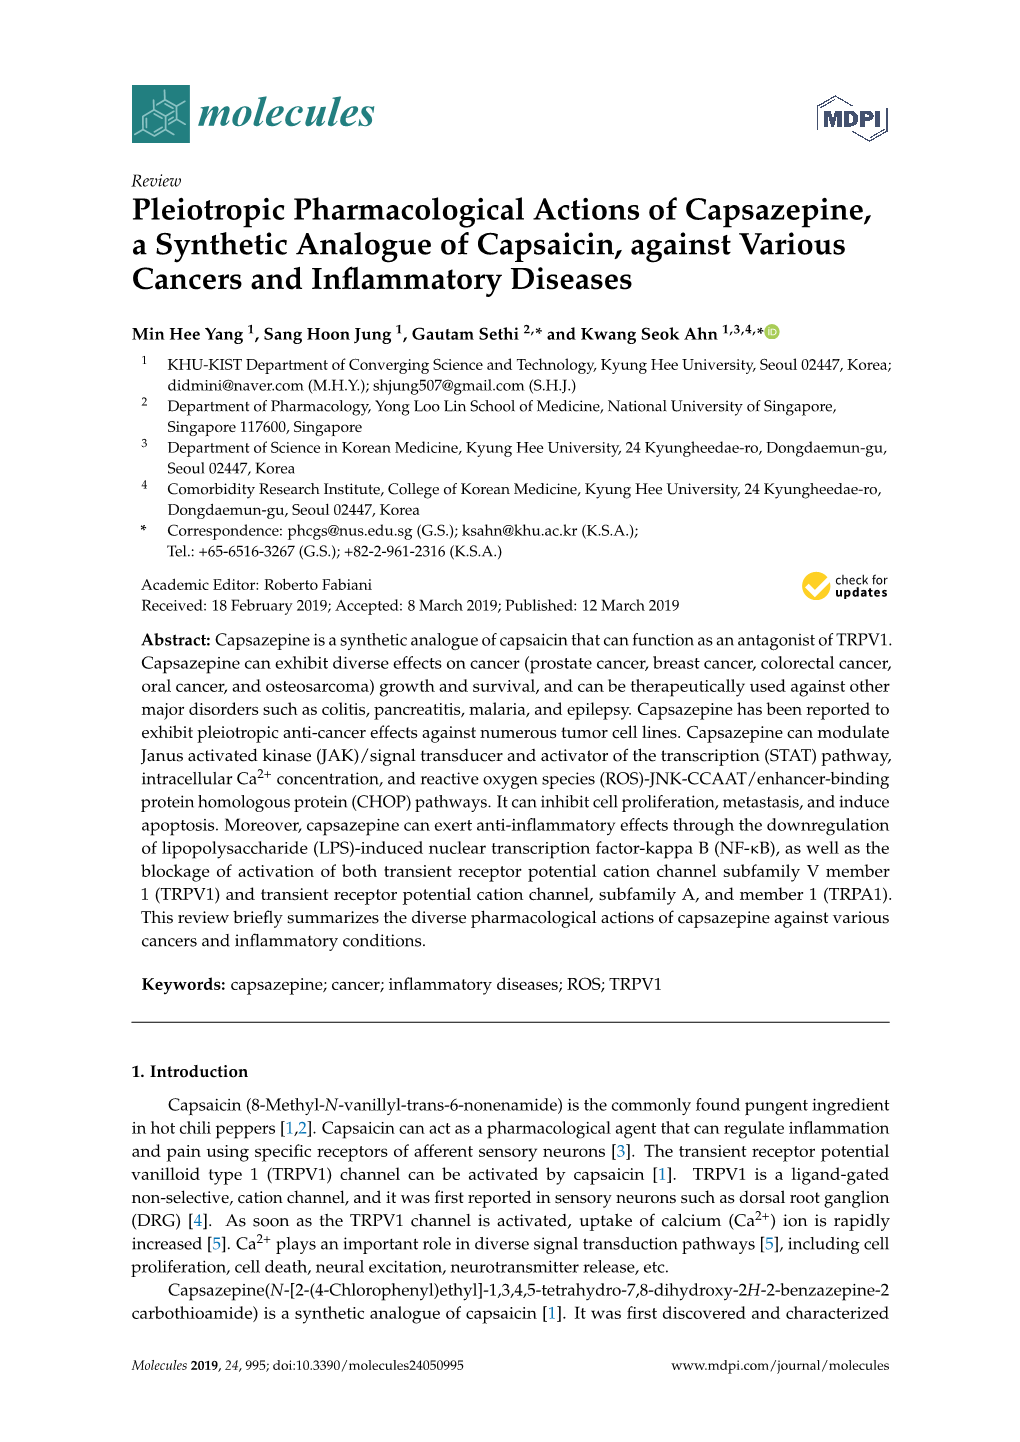 Pleiotropic Pharmacological Actions of Capsazepine, a Synthetic Analogue of Capsaicin, Against Various Cancers and Inﬂammatory Diseases